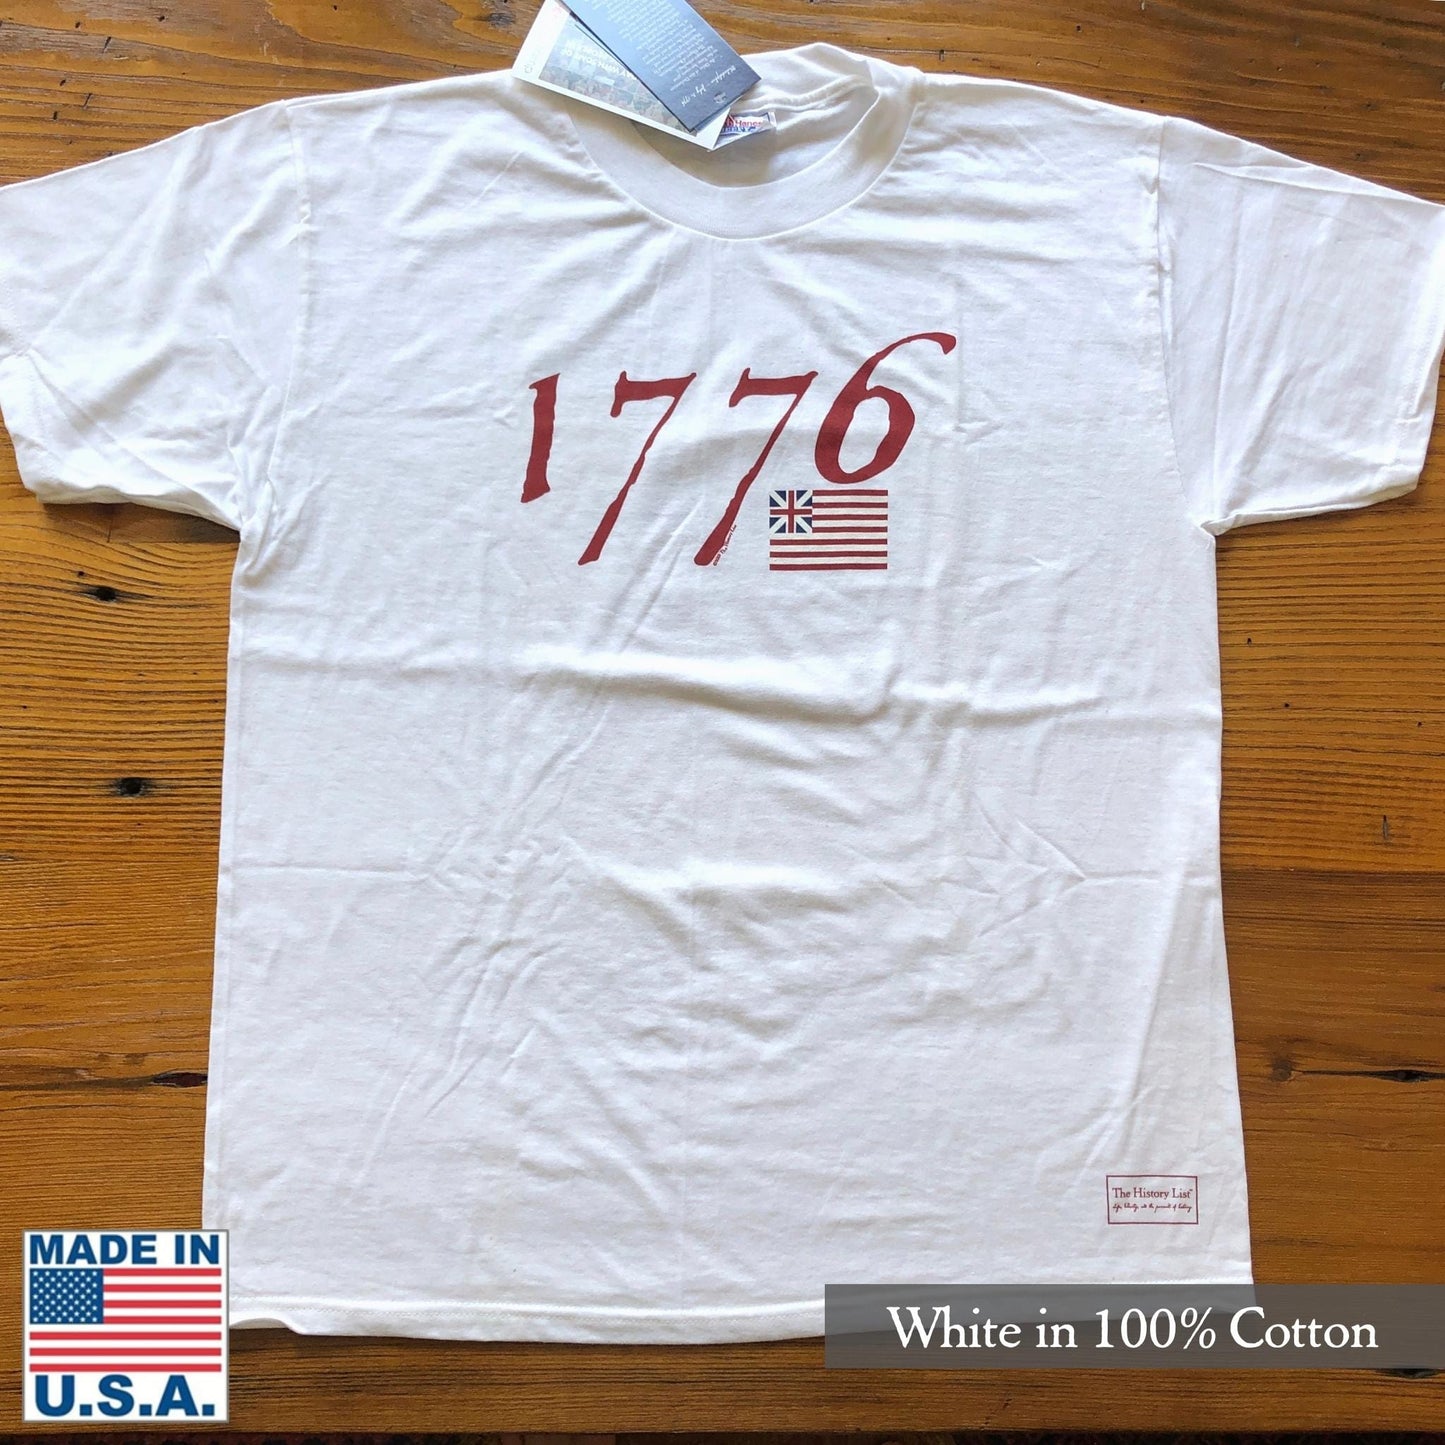 We Hold These Truths - July 4, 1776” T-Shirt Washed Denim - 100% USA Grown Cotton / 3XL